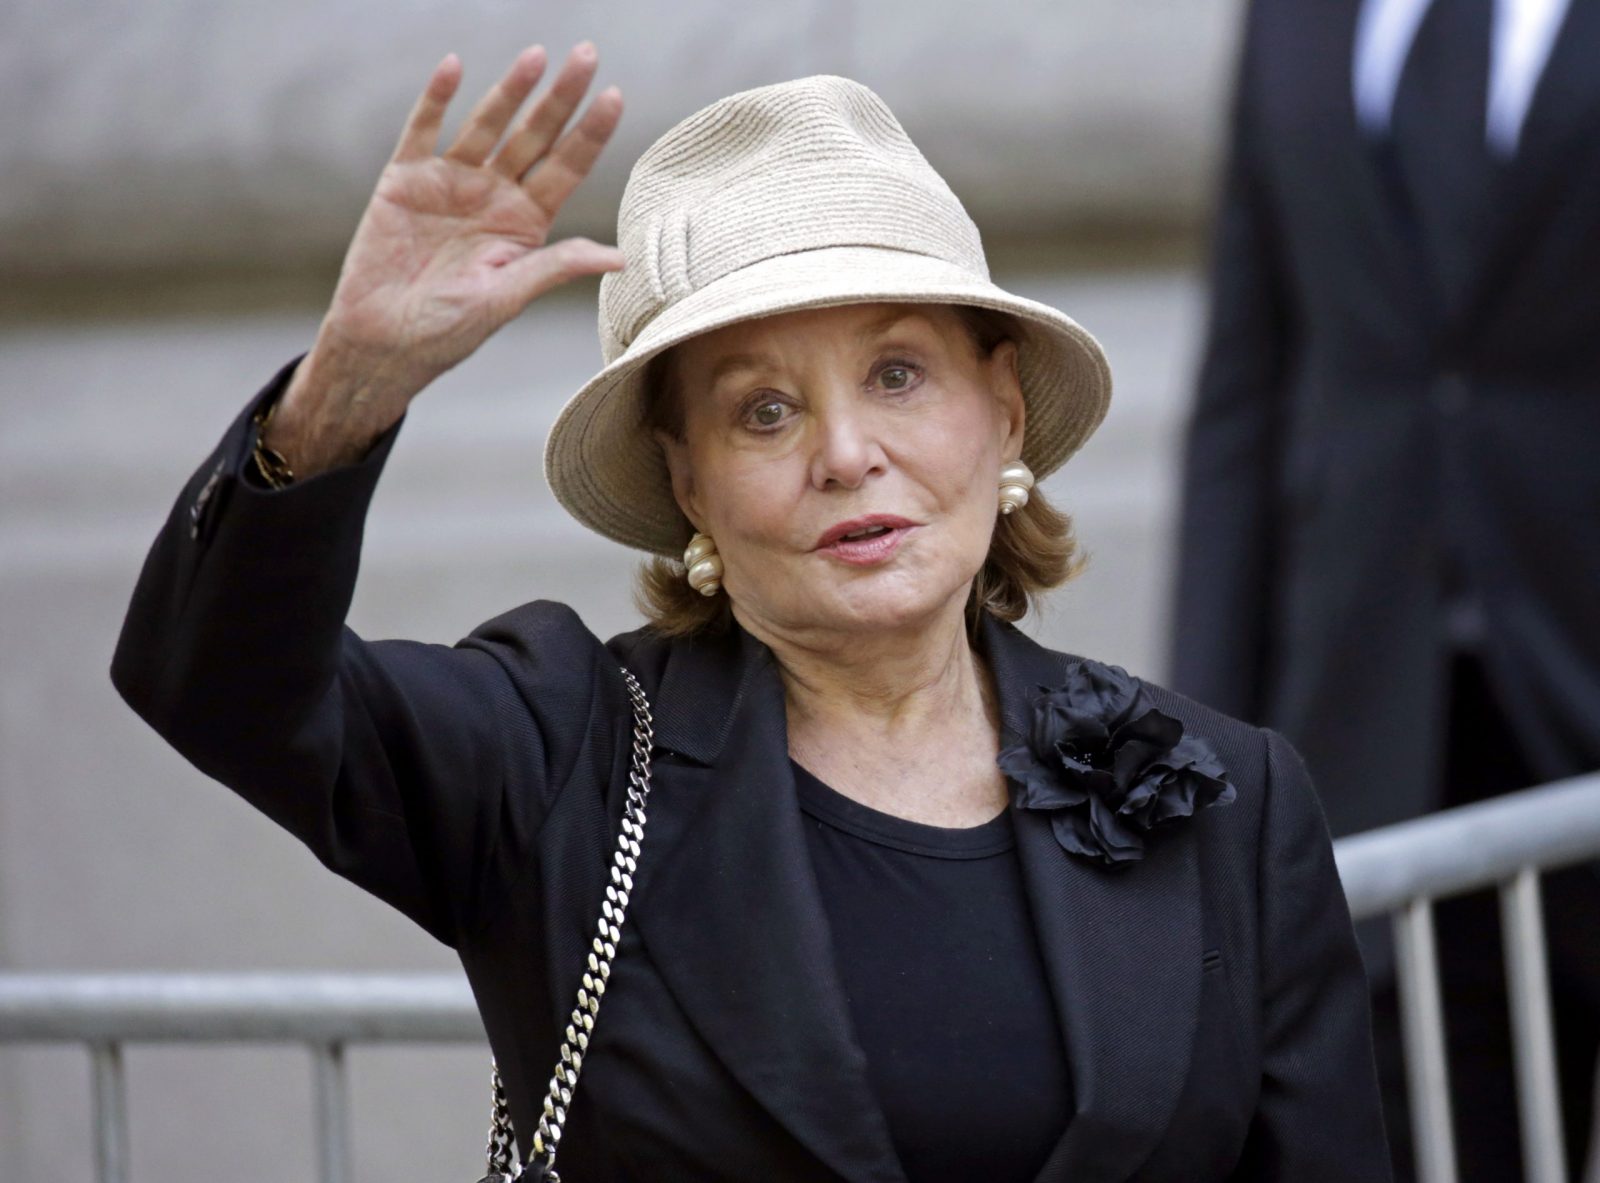 epa10383329 (FILE) US broadcast journalist and television personality Barbara Walters arrives for the funeral of US comedienne Joan Rivers at Temple Emanu-El in New York, New York, USA, 07 September 2014 (reissued 30 December 2022). According to a statement posted by Robert Iger, CEO of Disney, the parent company of Walters' longtime broadcaster ABC, Barbara Walters died at her home in New York City on 30 December 2022 at the age of 93.  EPA/PETER FOLEY *** Local Caption *** 51558033